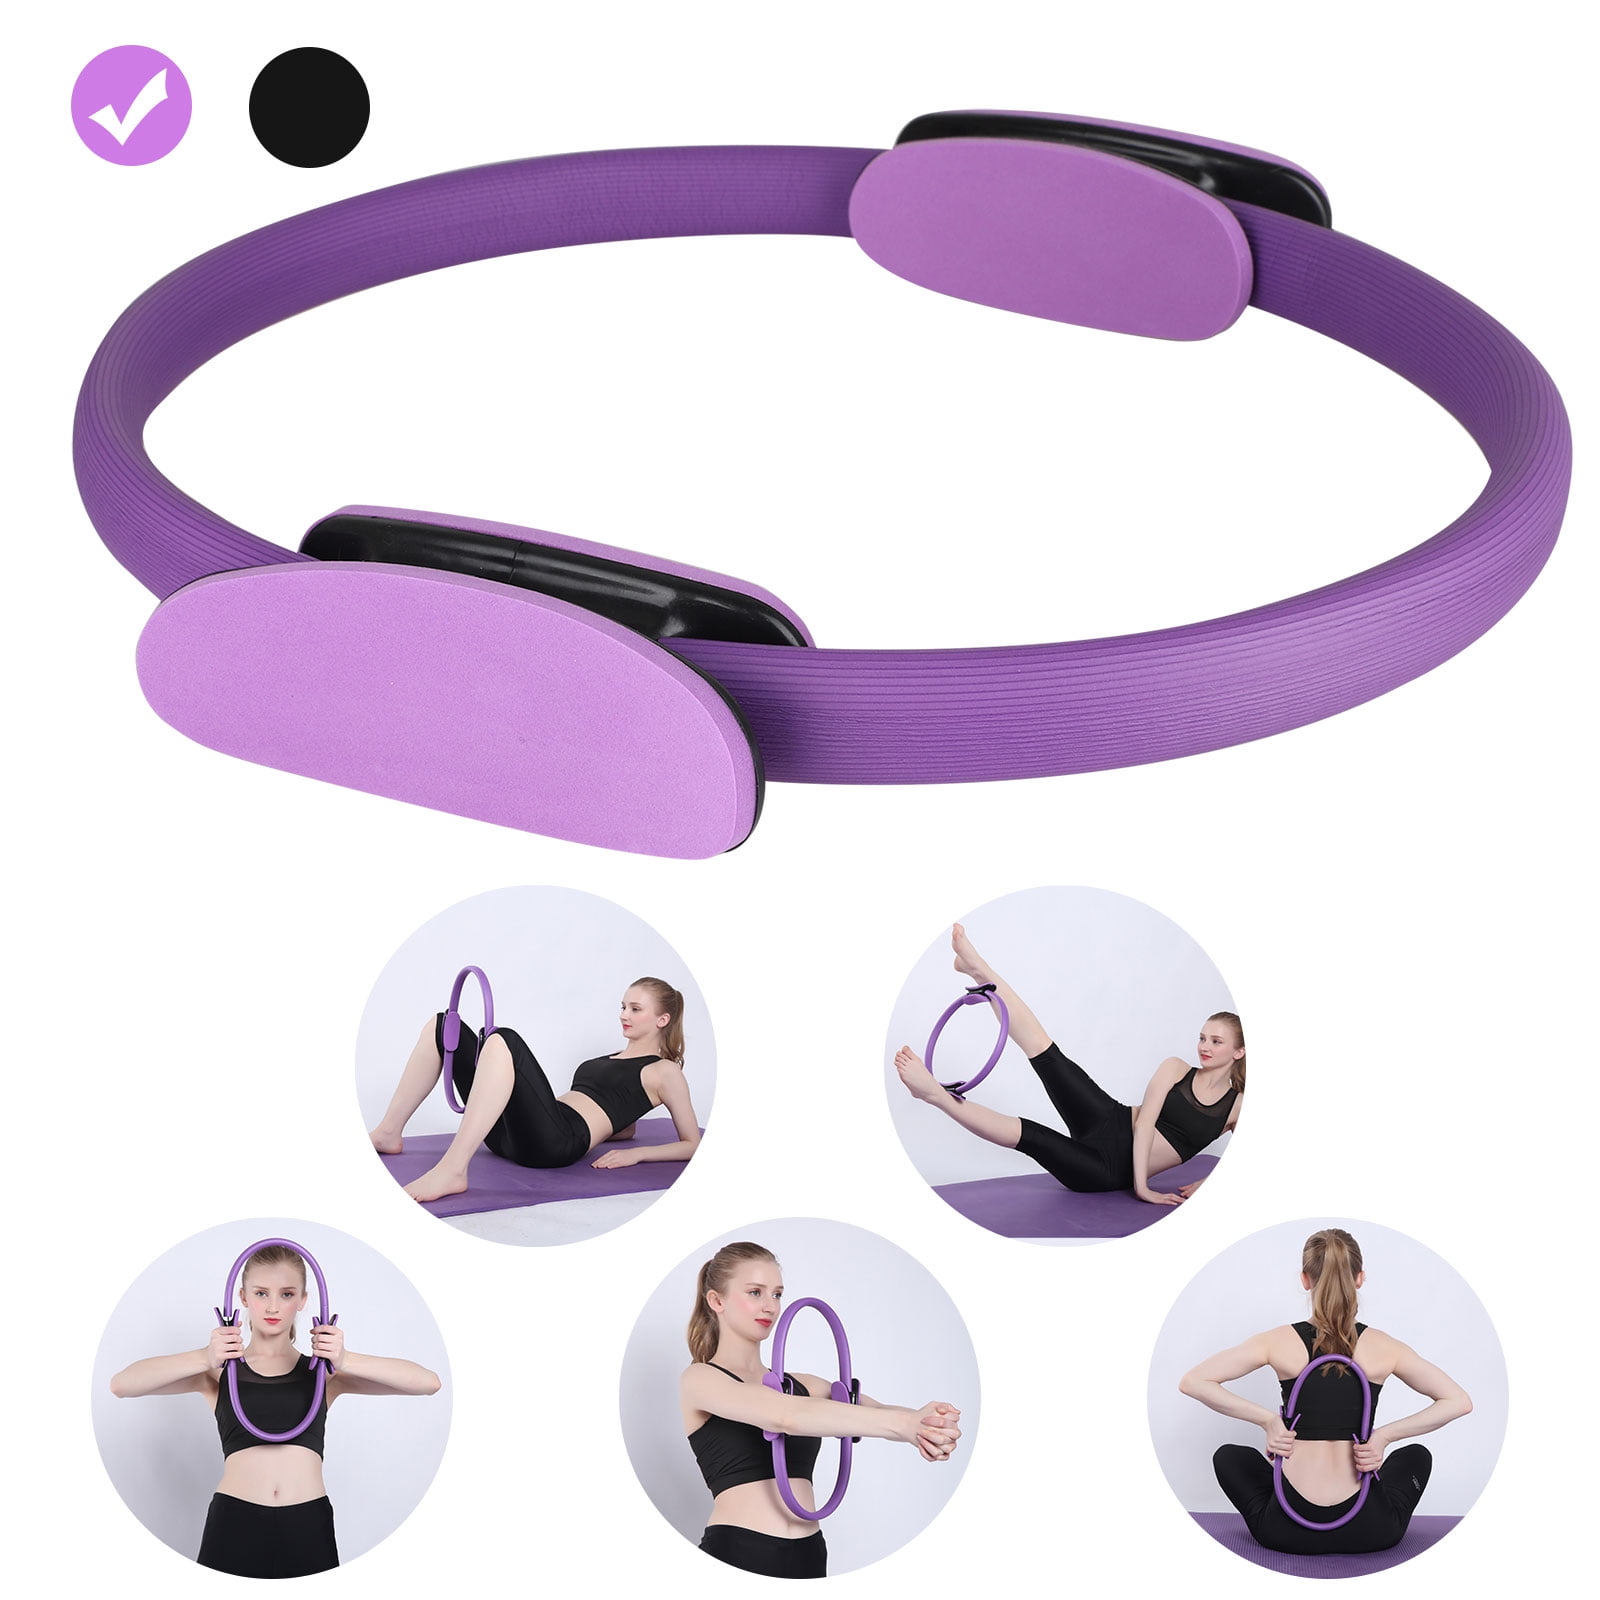 EEEkit Fitness Pilates Ring, 15in Fitness Magic Circle with Dual Grip Handles, Yoga Fitness Circle, Balanced Body Ultra-Fit Circle Pilates Ring for Both Beginners and Advanced, Lightweight & Resistant - Walmart.com